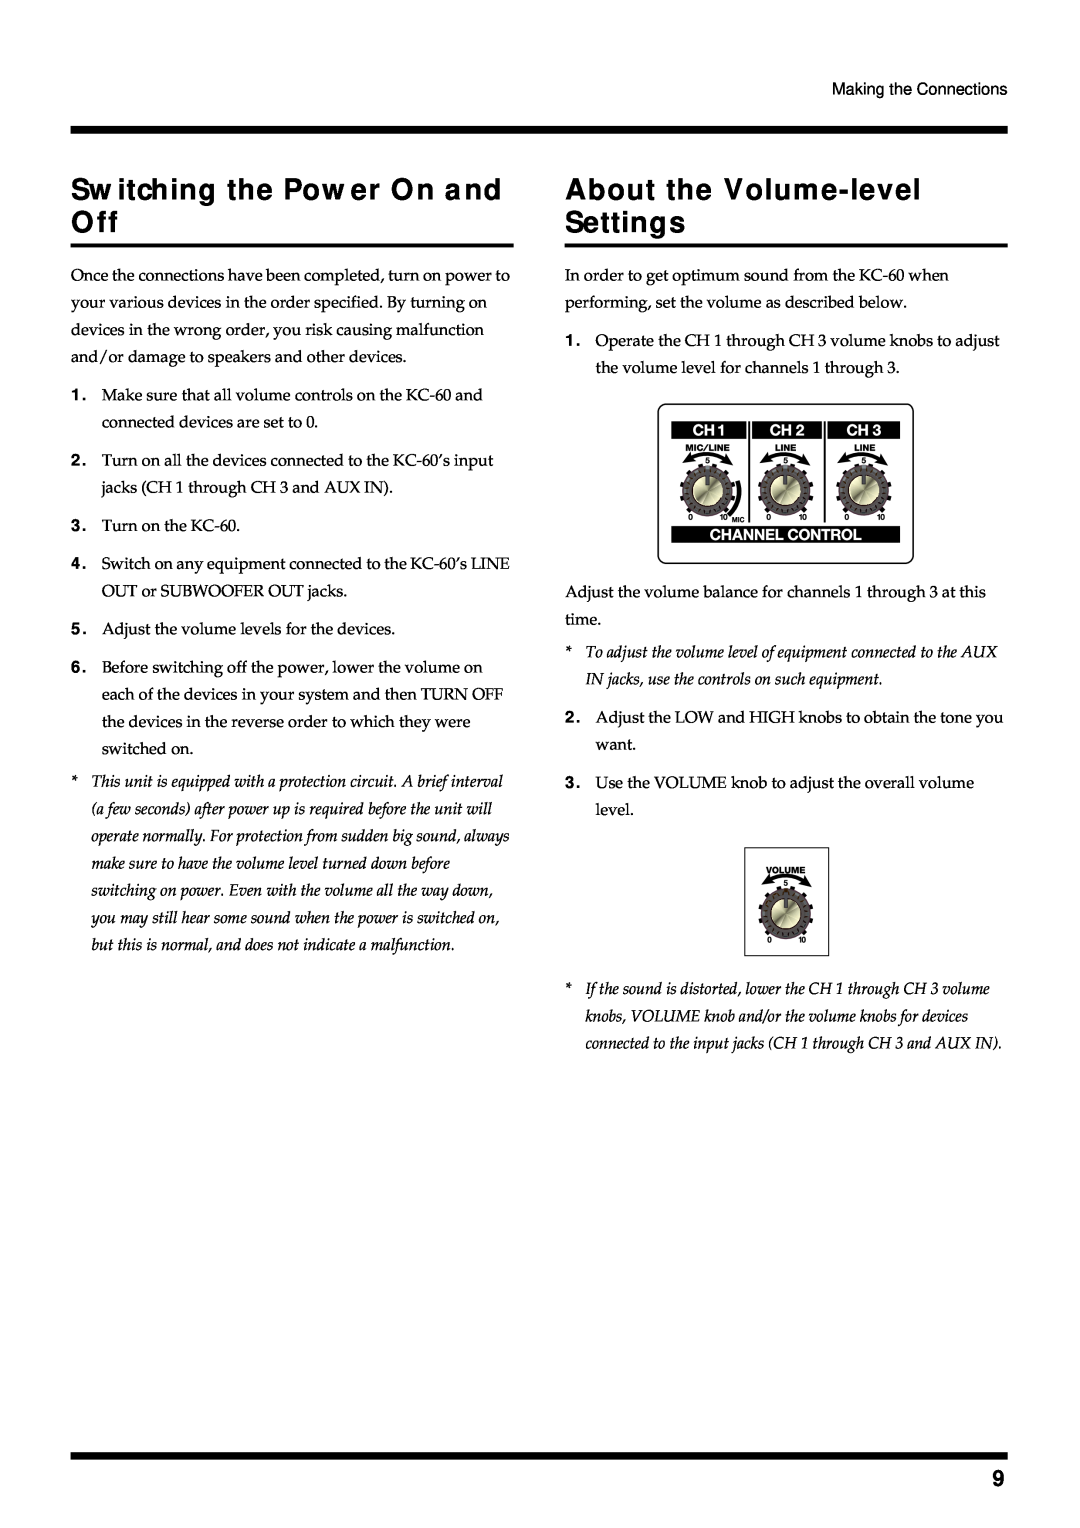 Roland KC-60 owner manual Switching the Power On and Off, About the Volume-level Settings 